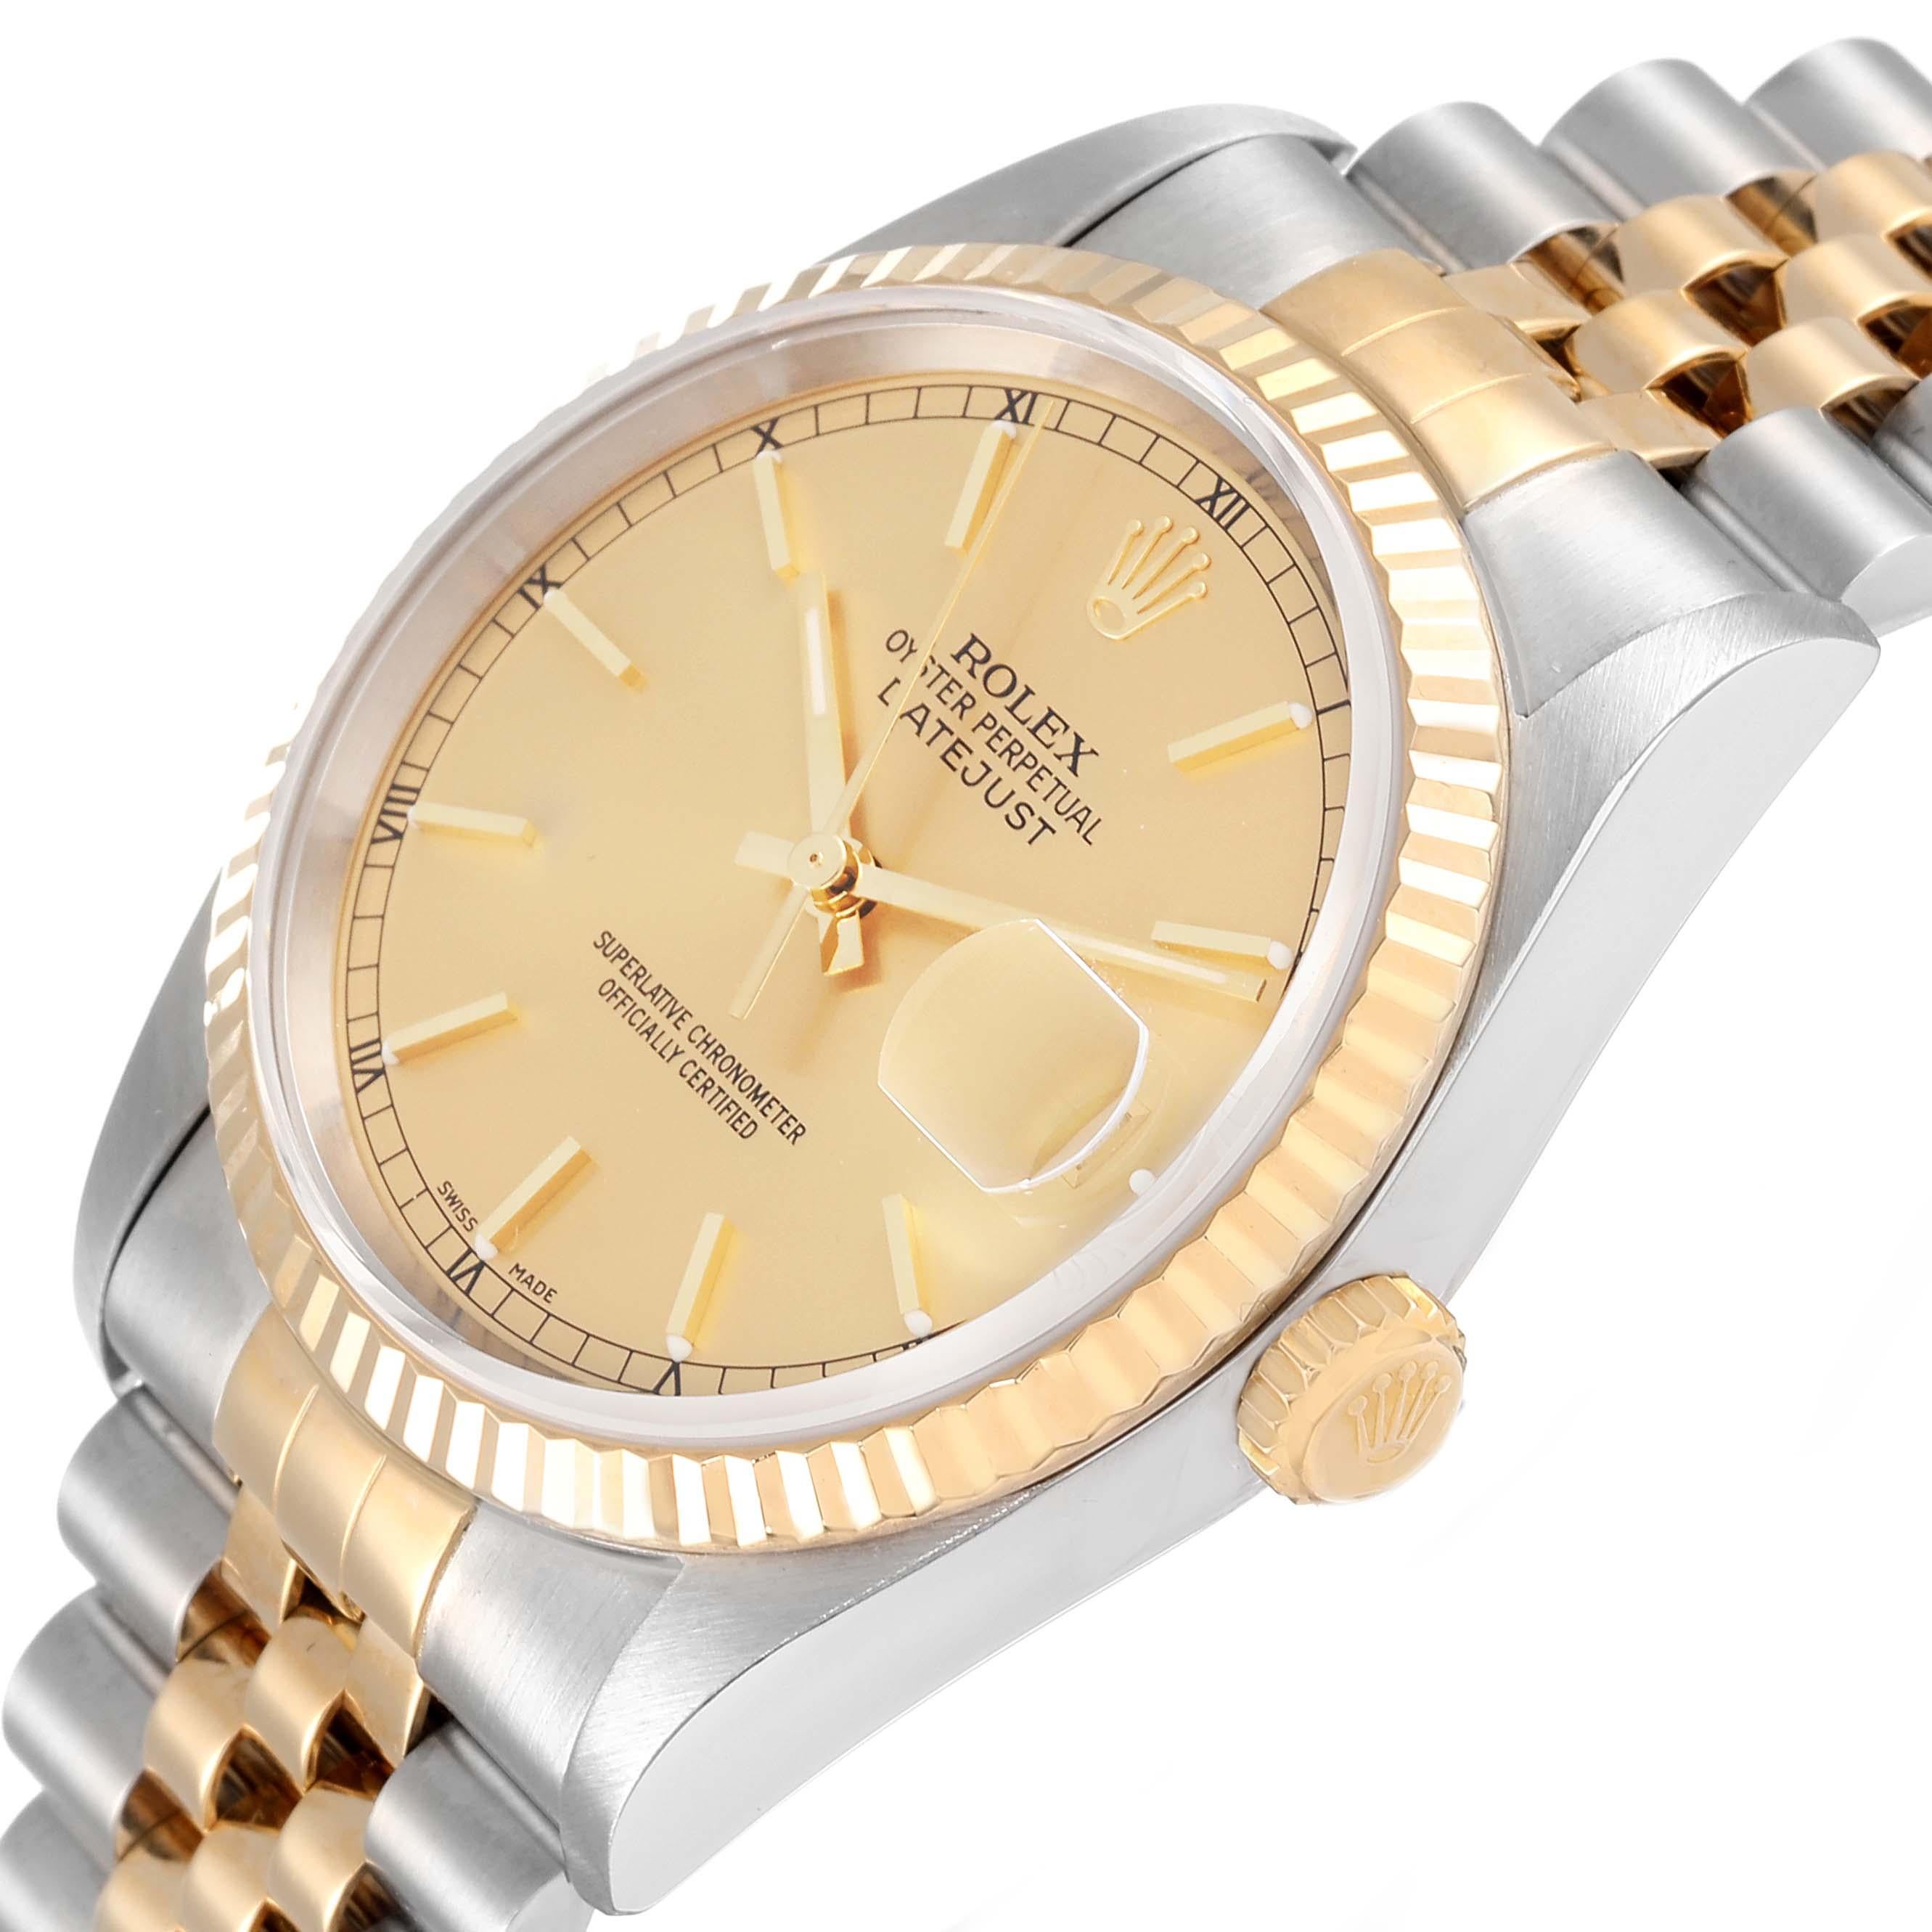 Men's Rolex Datejust Champagne Dial Steel Yellow Gold Mens Watch 16233 Box Papers